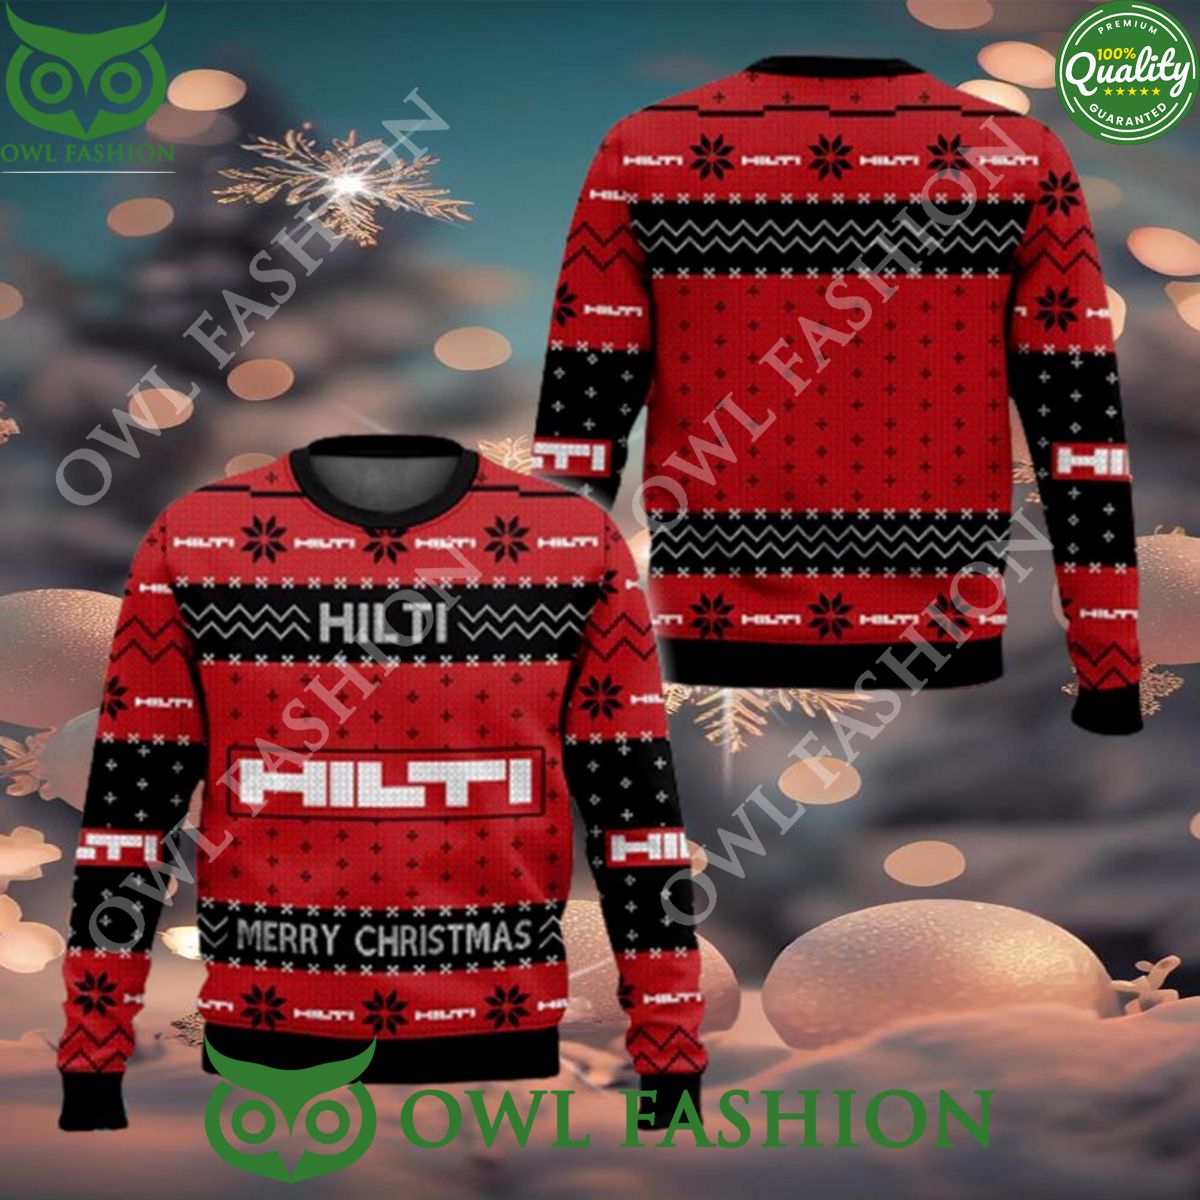 Power Tools Hilti Logo New Christmas Ugly Sweater Jumper